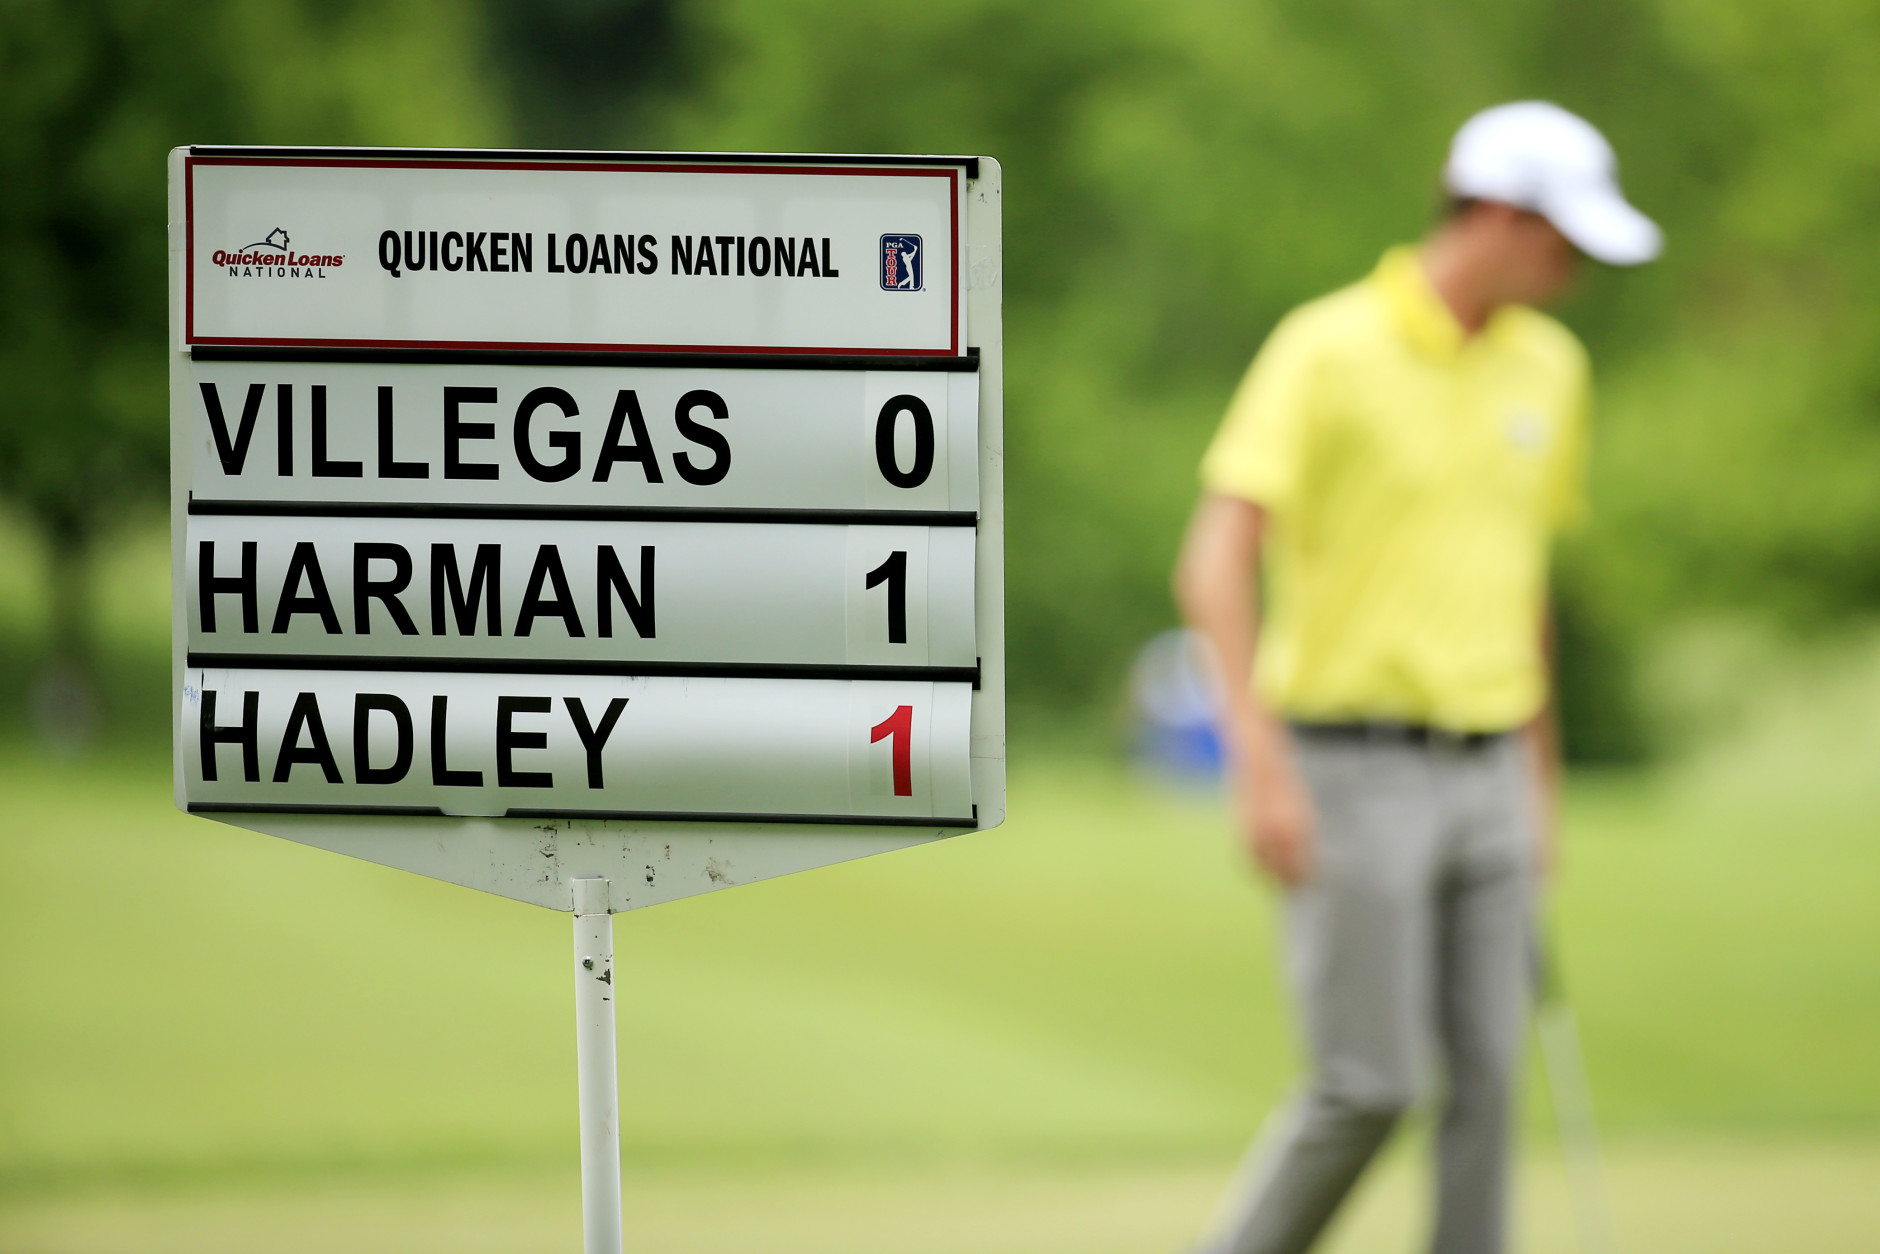 BETHESDA, MD - JUNE 23:  A view of the leaderboard as Chesson Hadley prepares to putt on the fourth green during the first round of the Quicken Loans National at Congressional Country Club on June 23, 2016 in Bethesda, Maryland.  (Photo by Rob Carr/Getty Images)